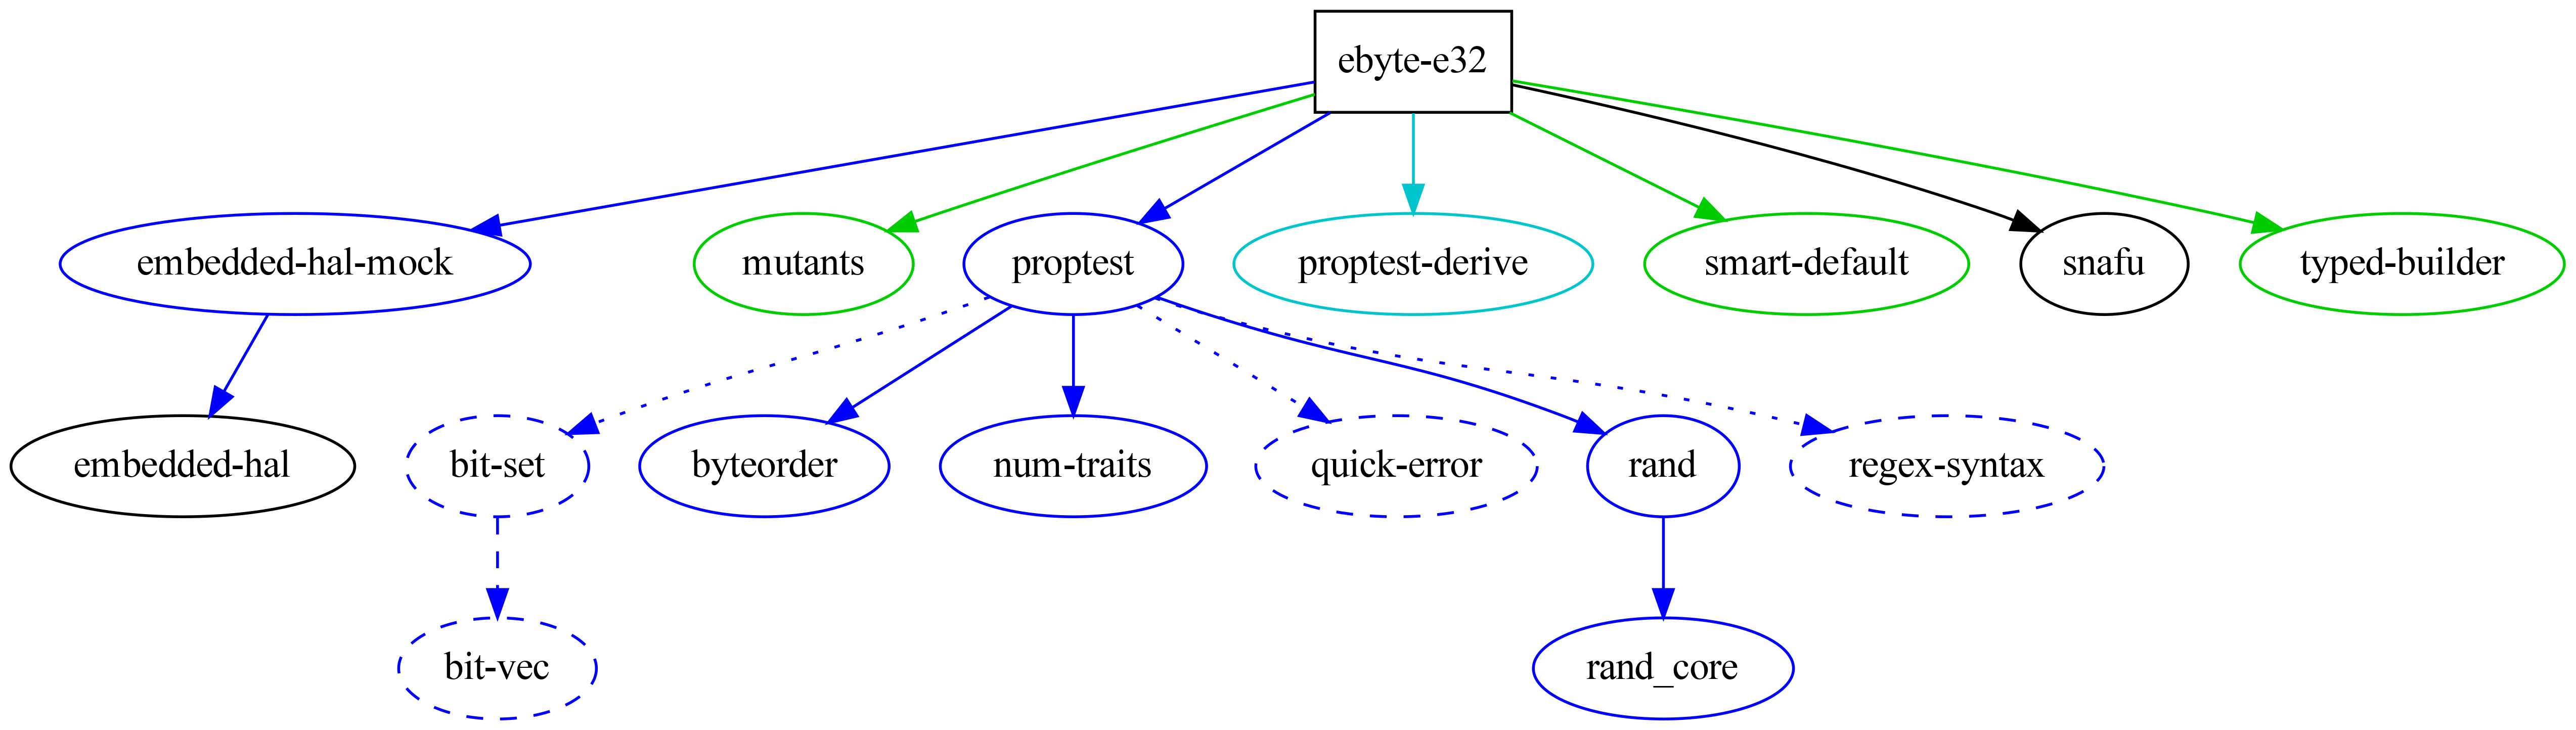 Image of Dependency Graph